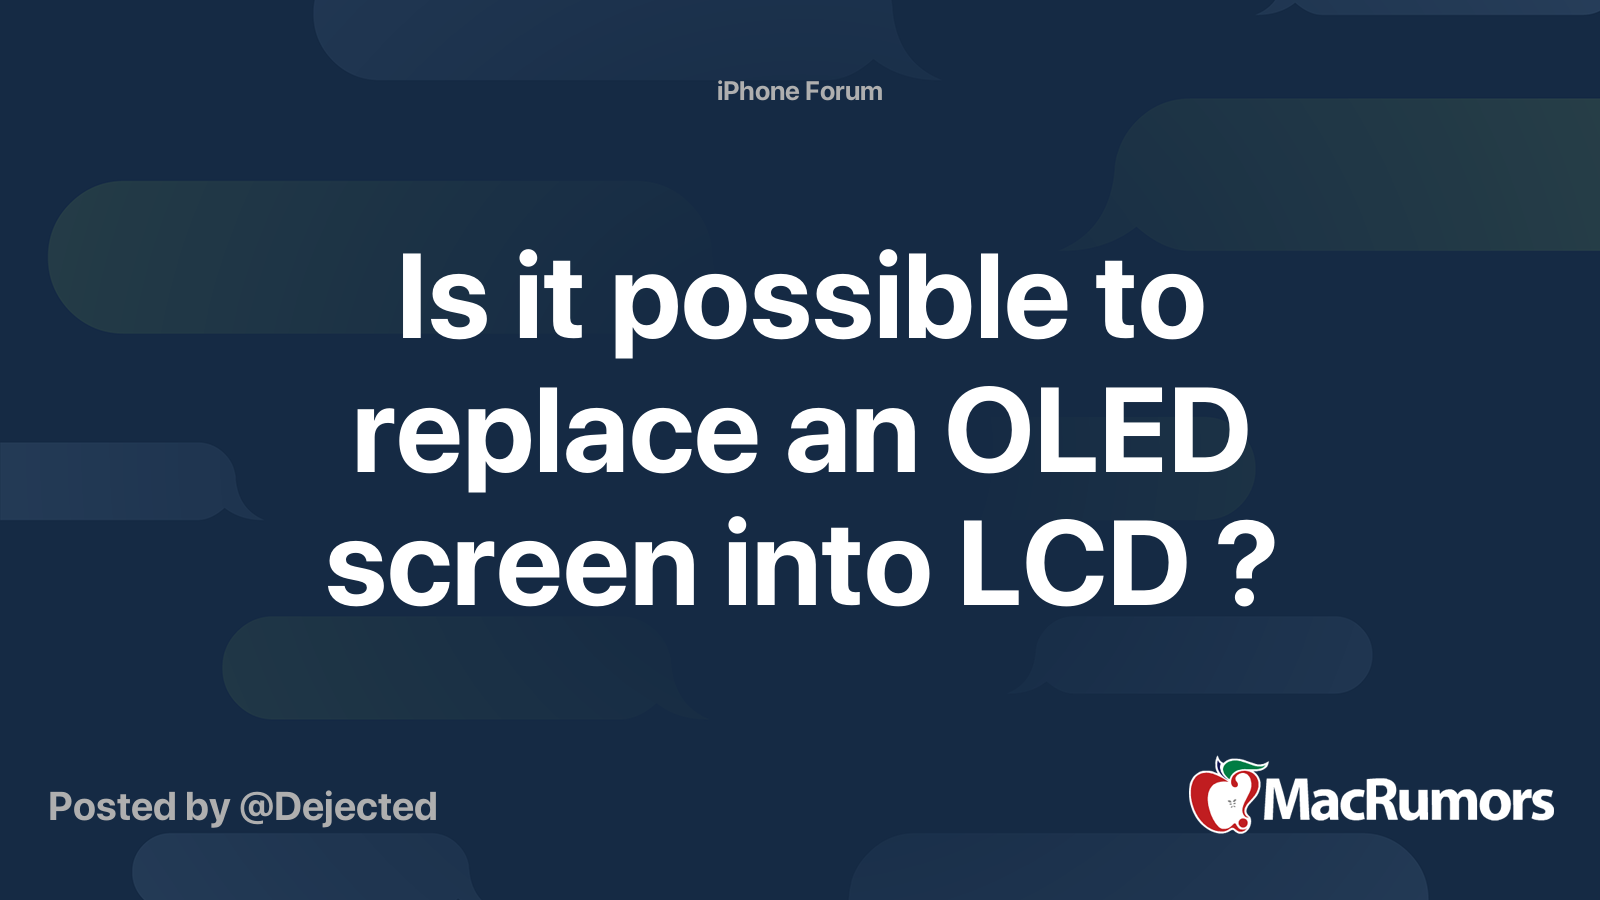 Now you can replace your iPhone's OLED screen with an LCD one for